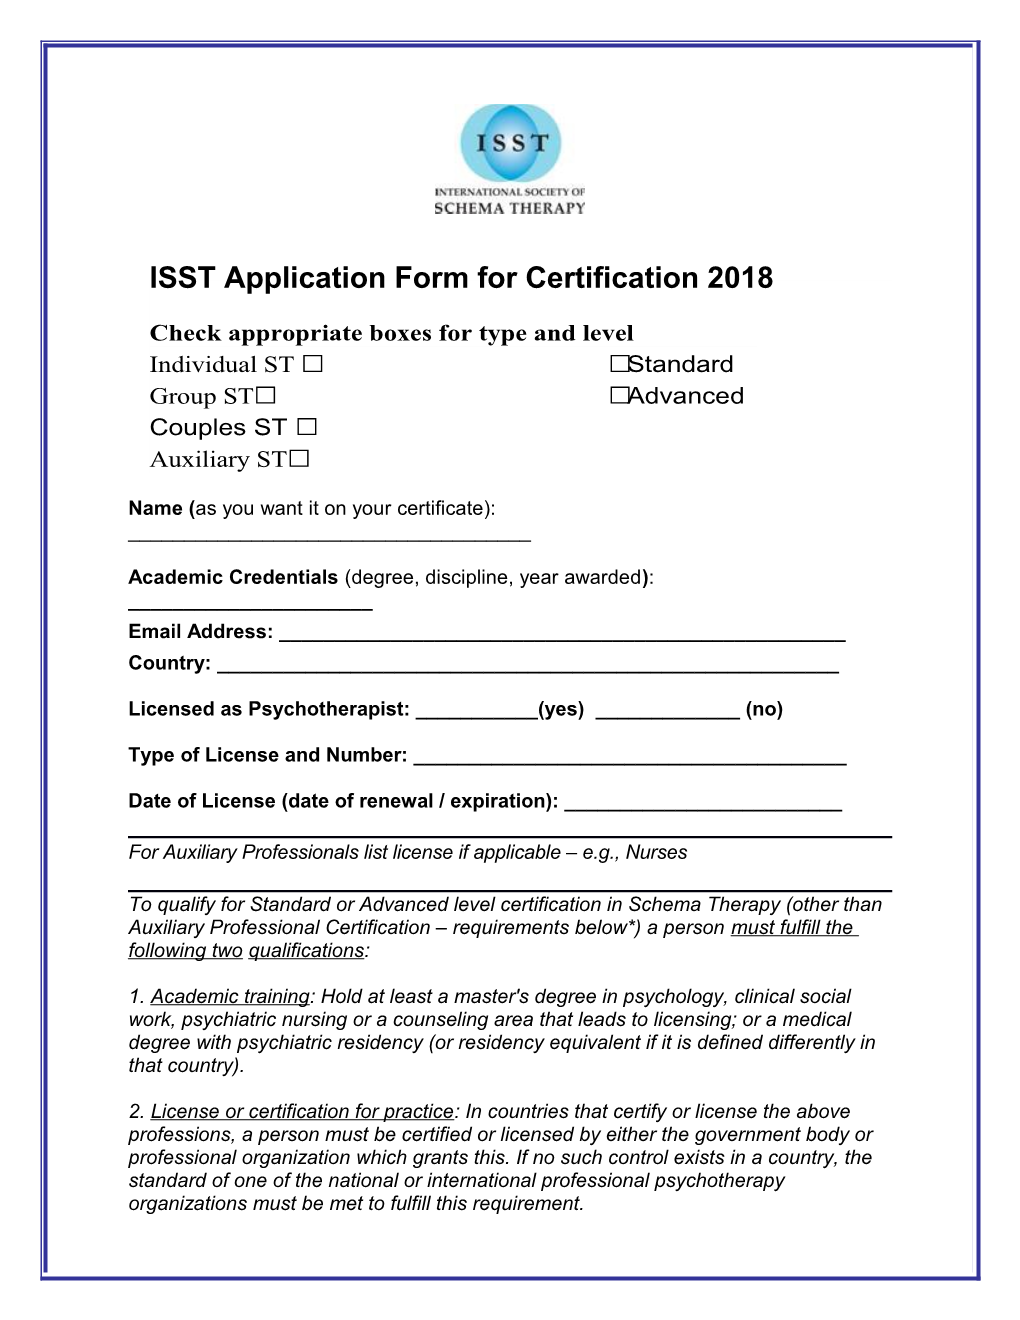 ISST Application Form for Certification 2018